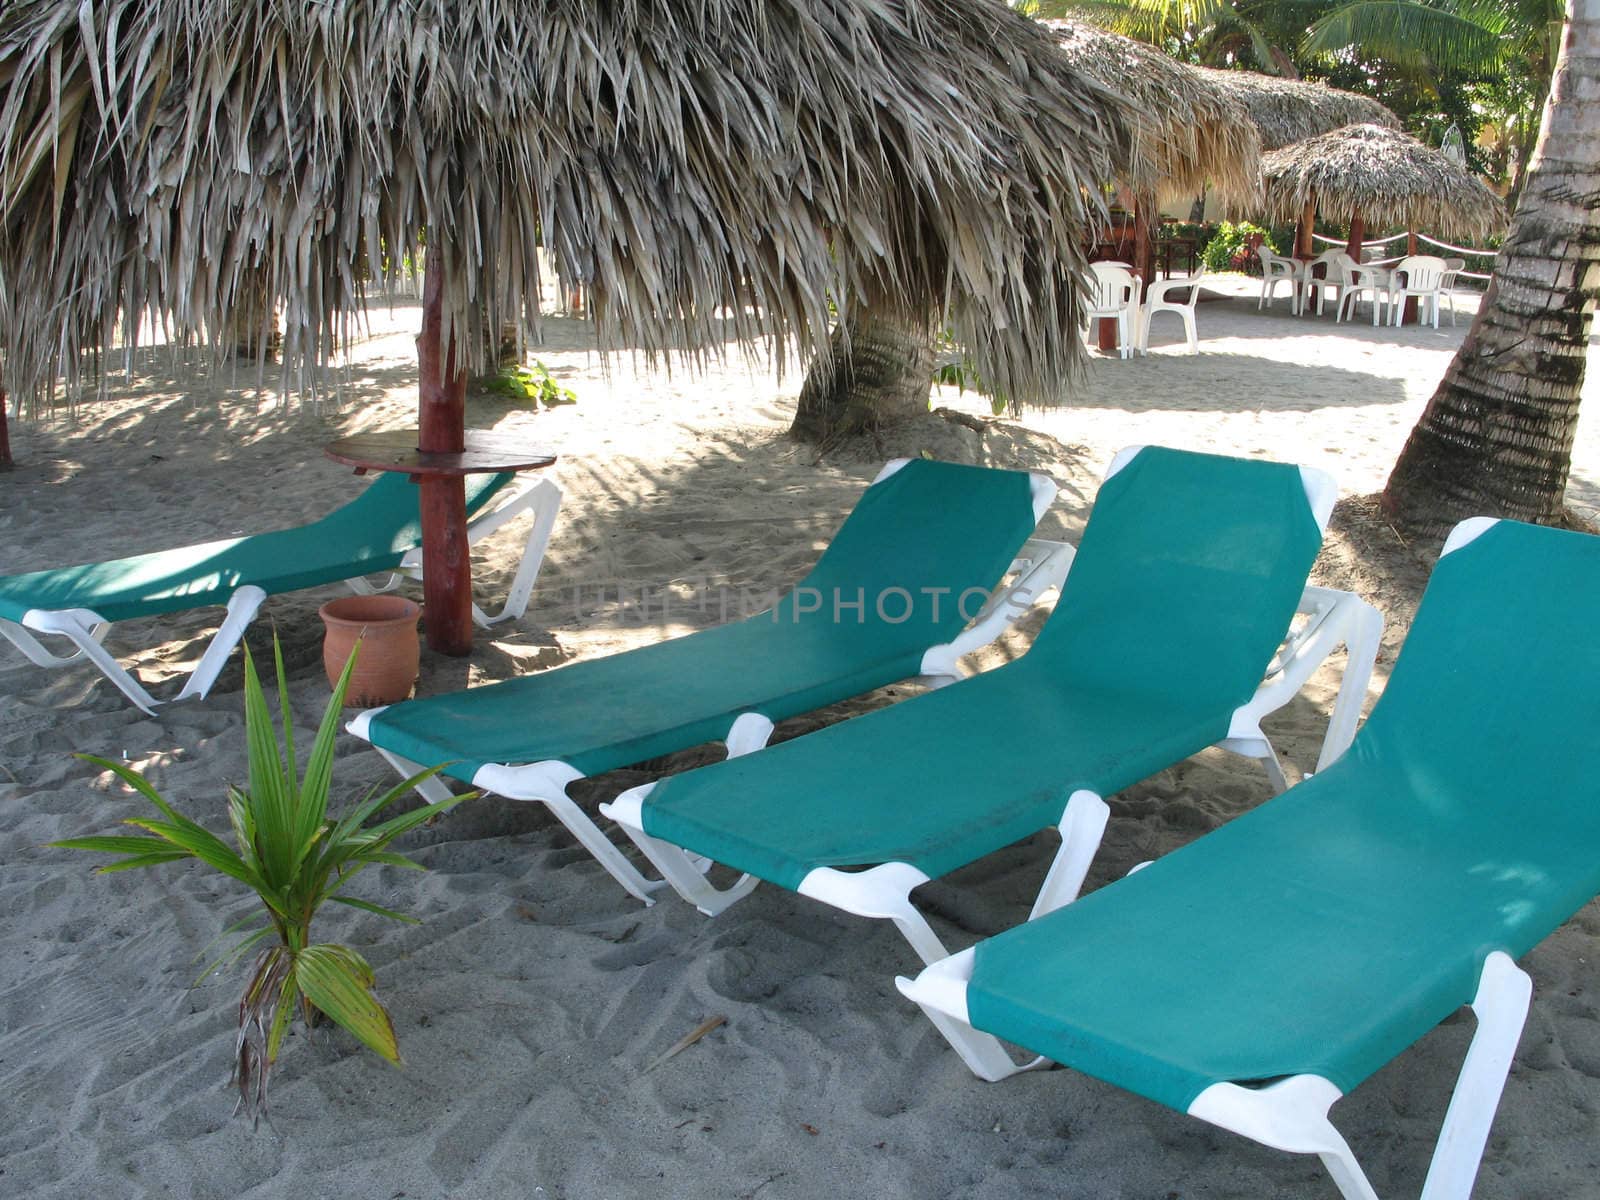 tanning chairs on the beach by mmm